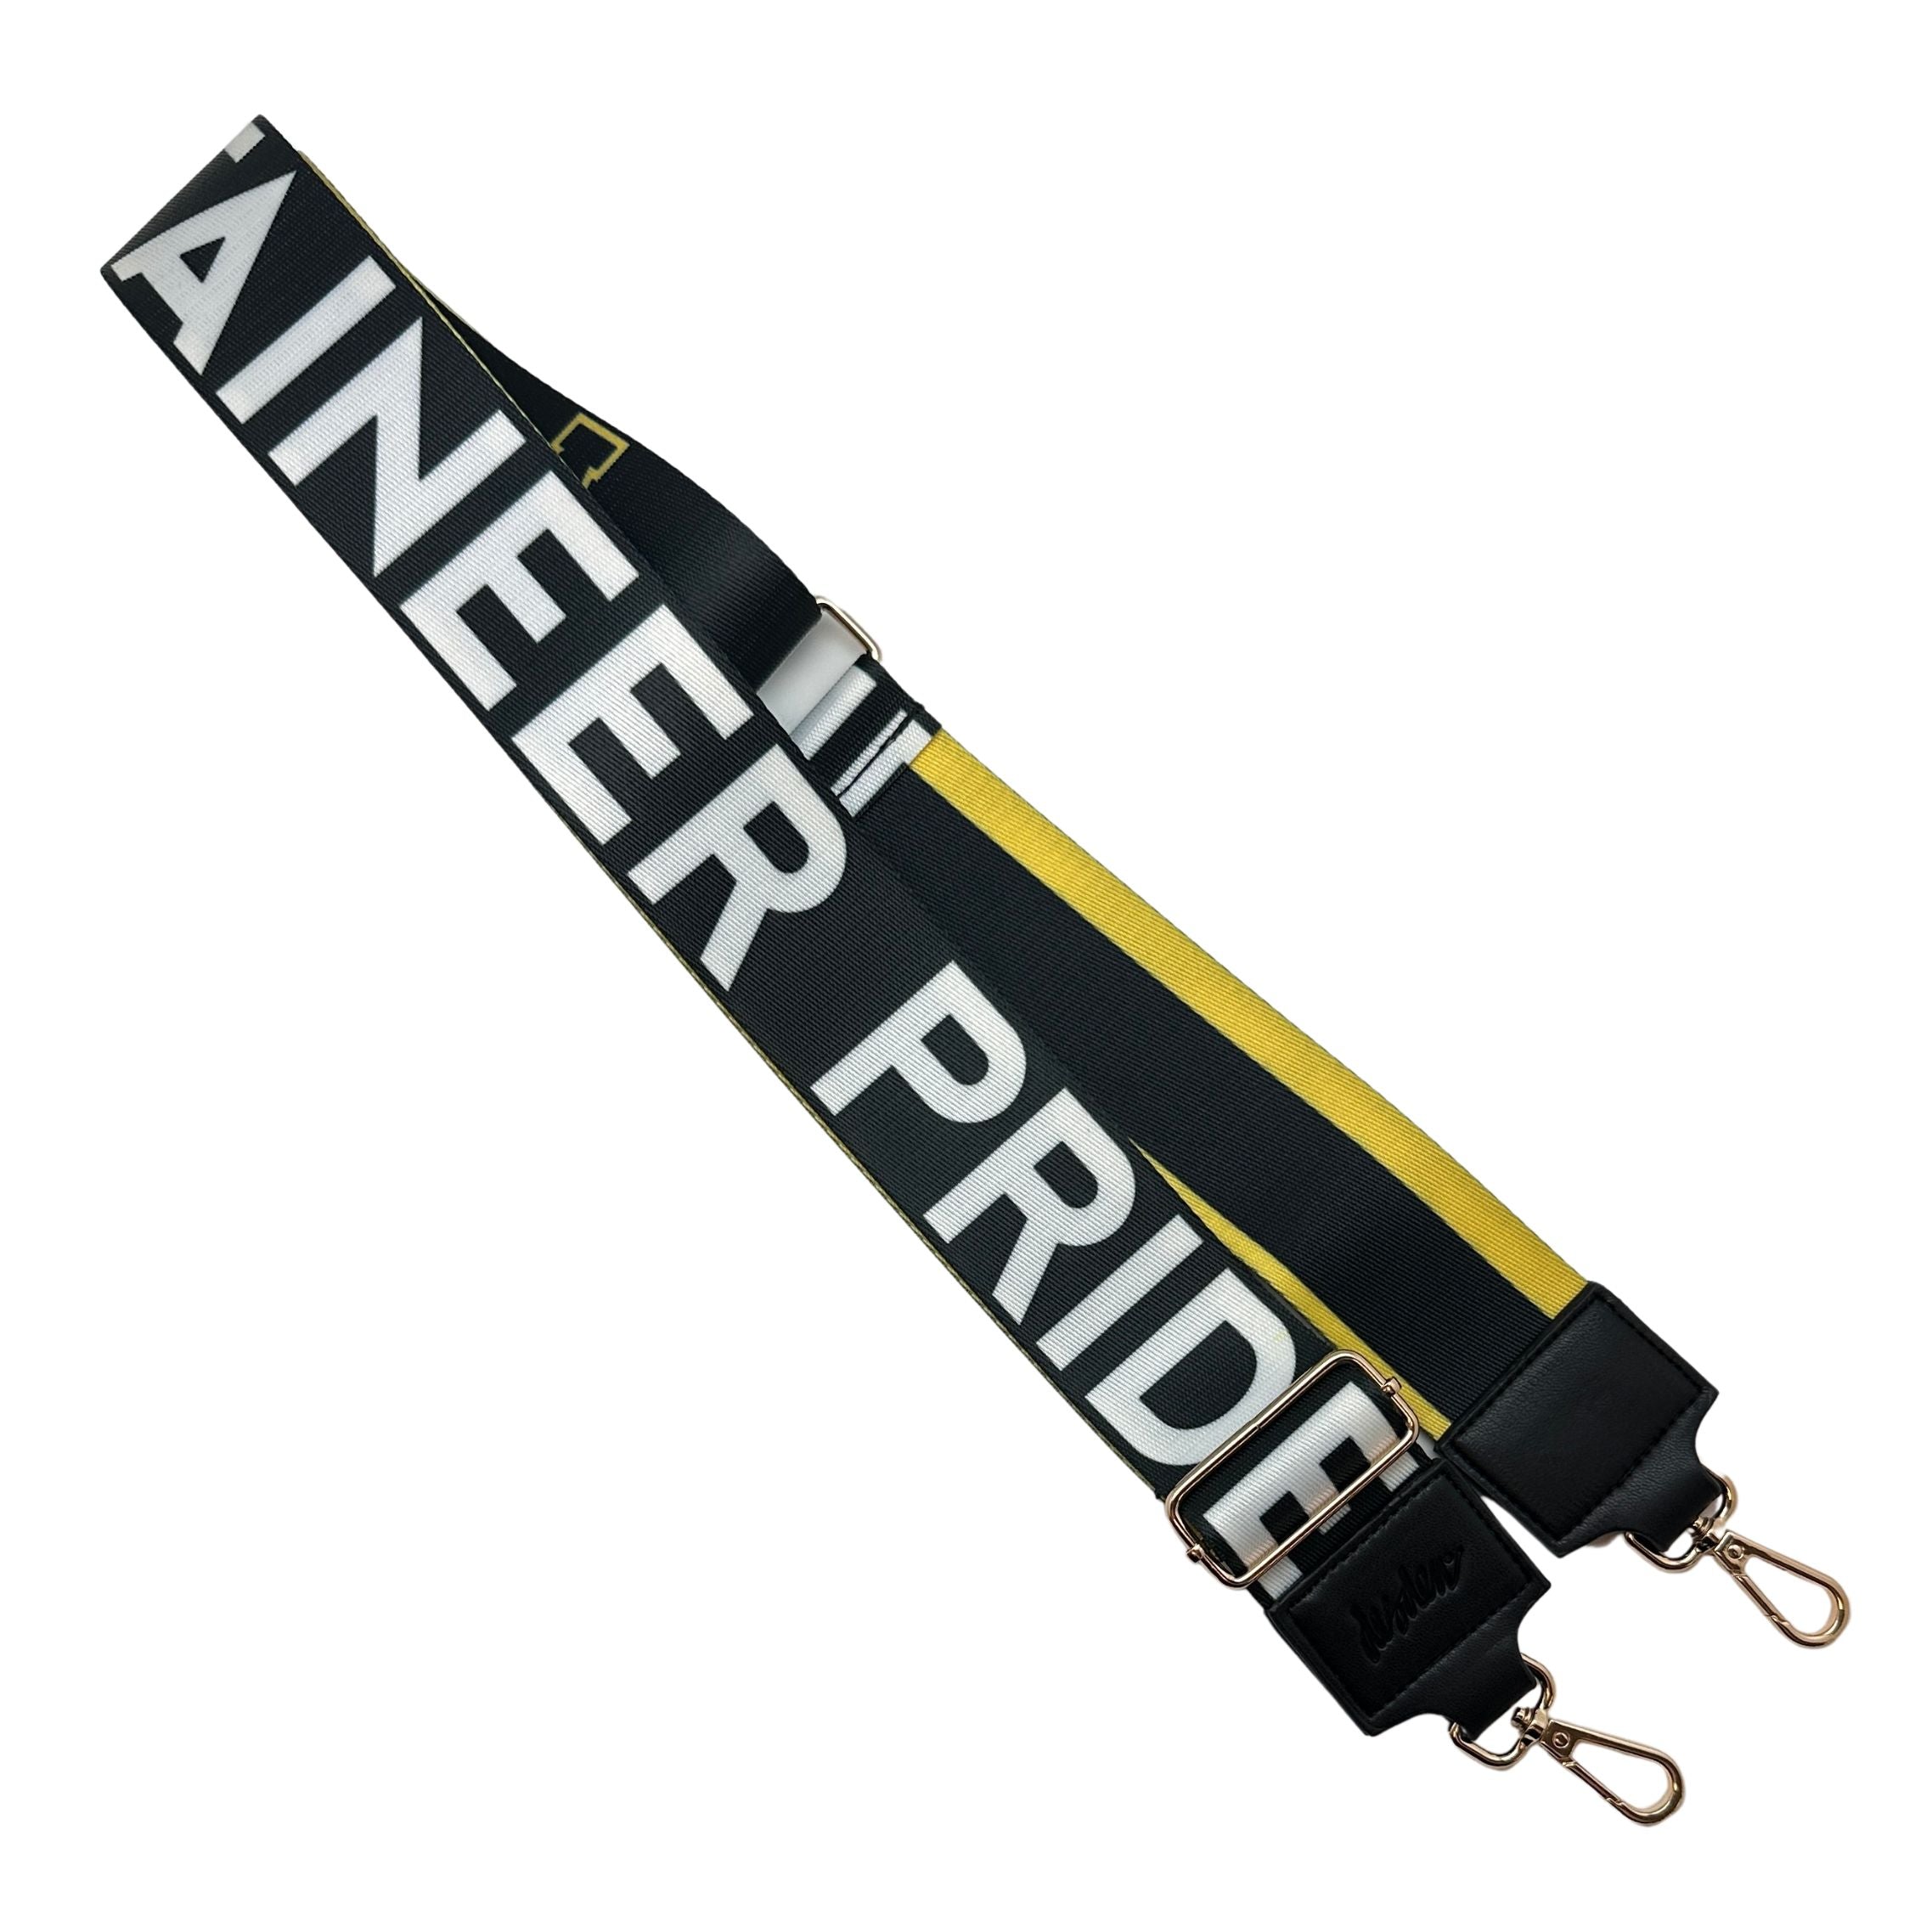 APPALACHIAN STATE 2" - Officially Licensed - Stripe